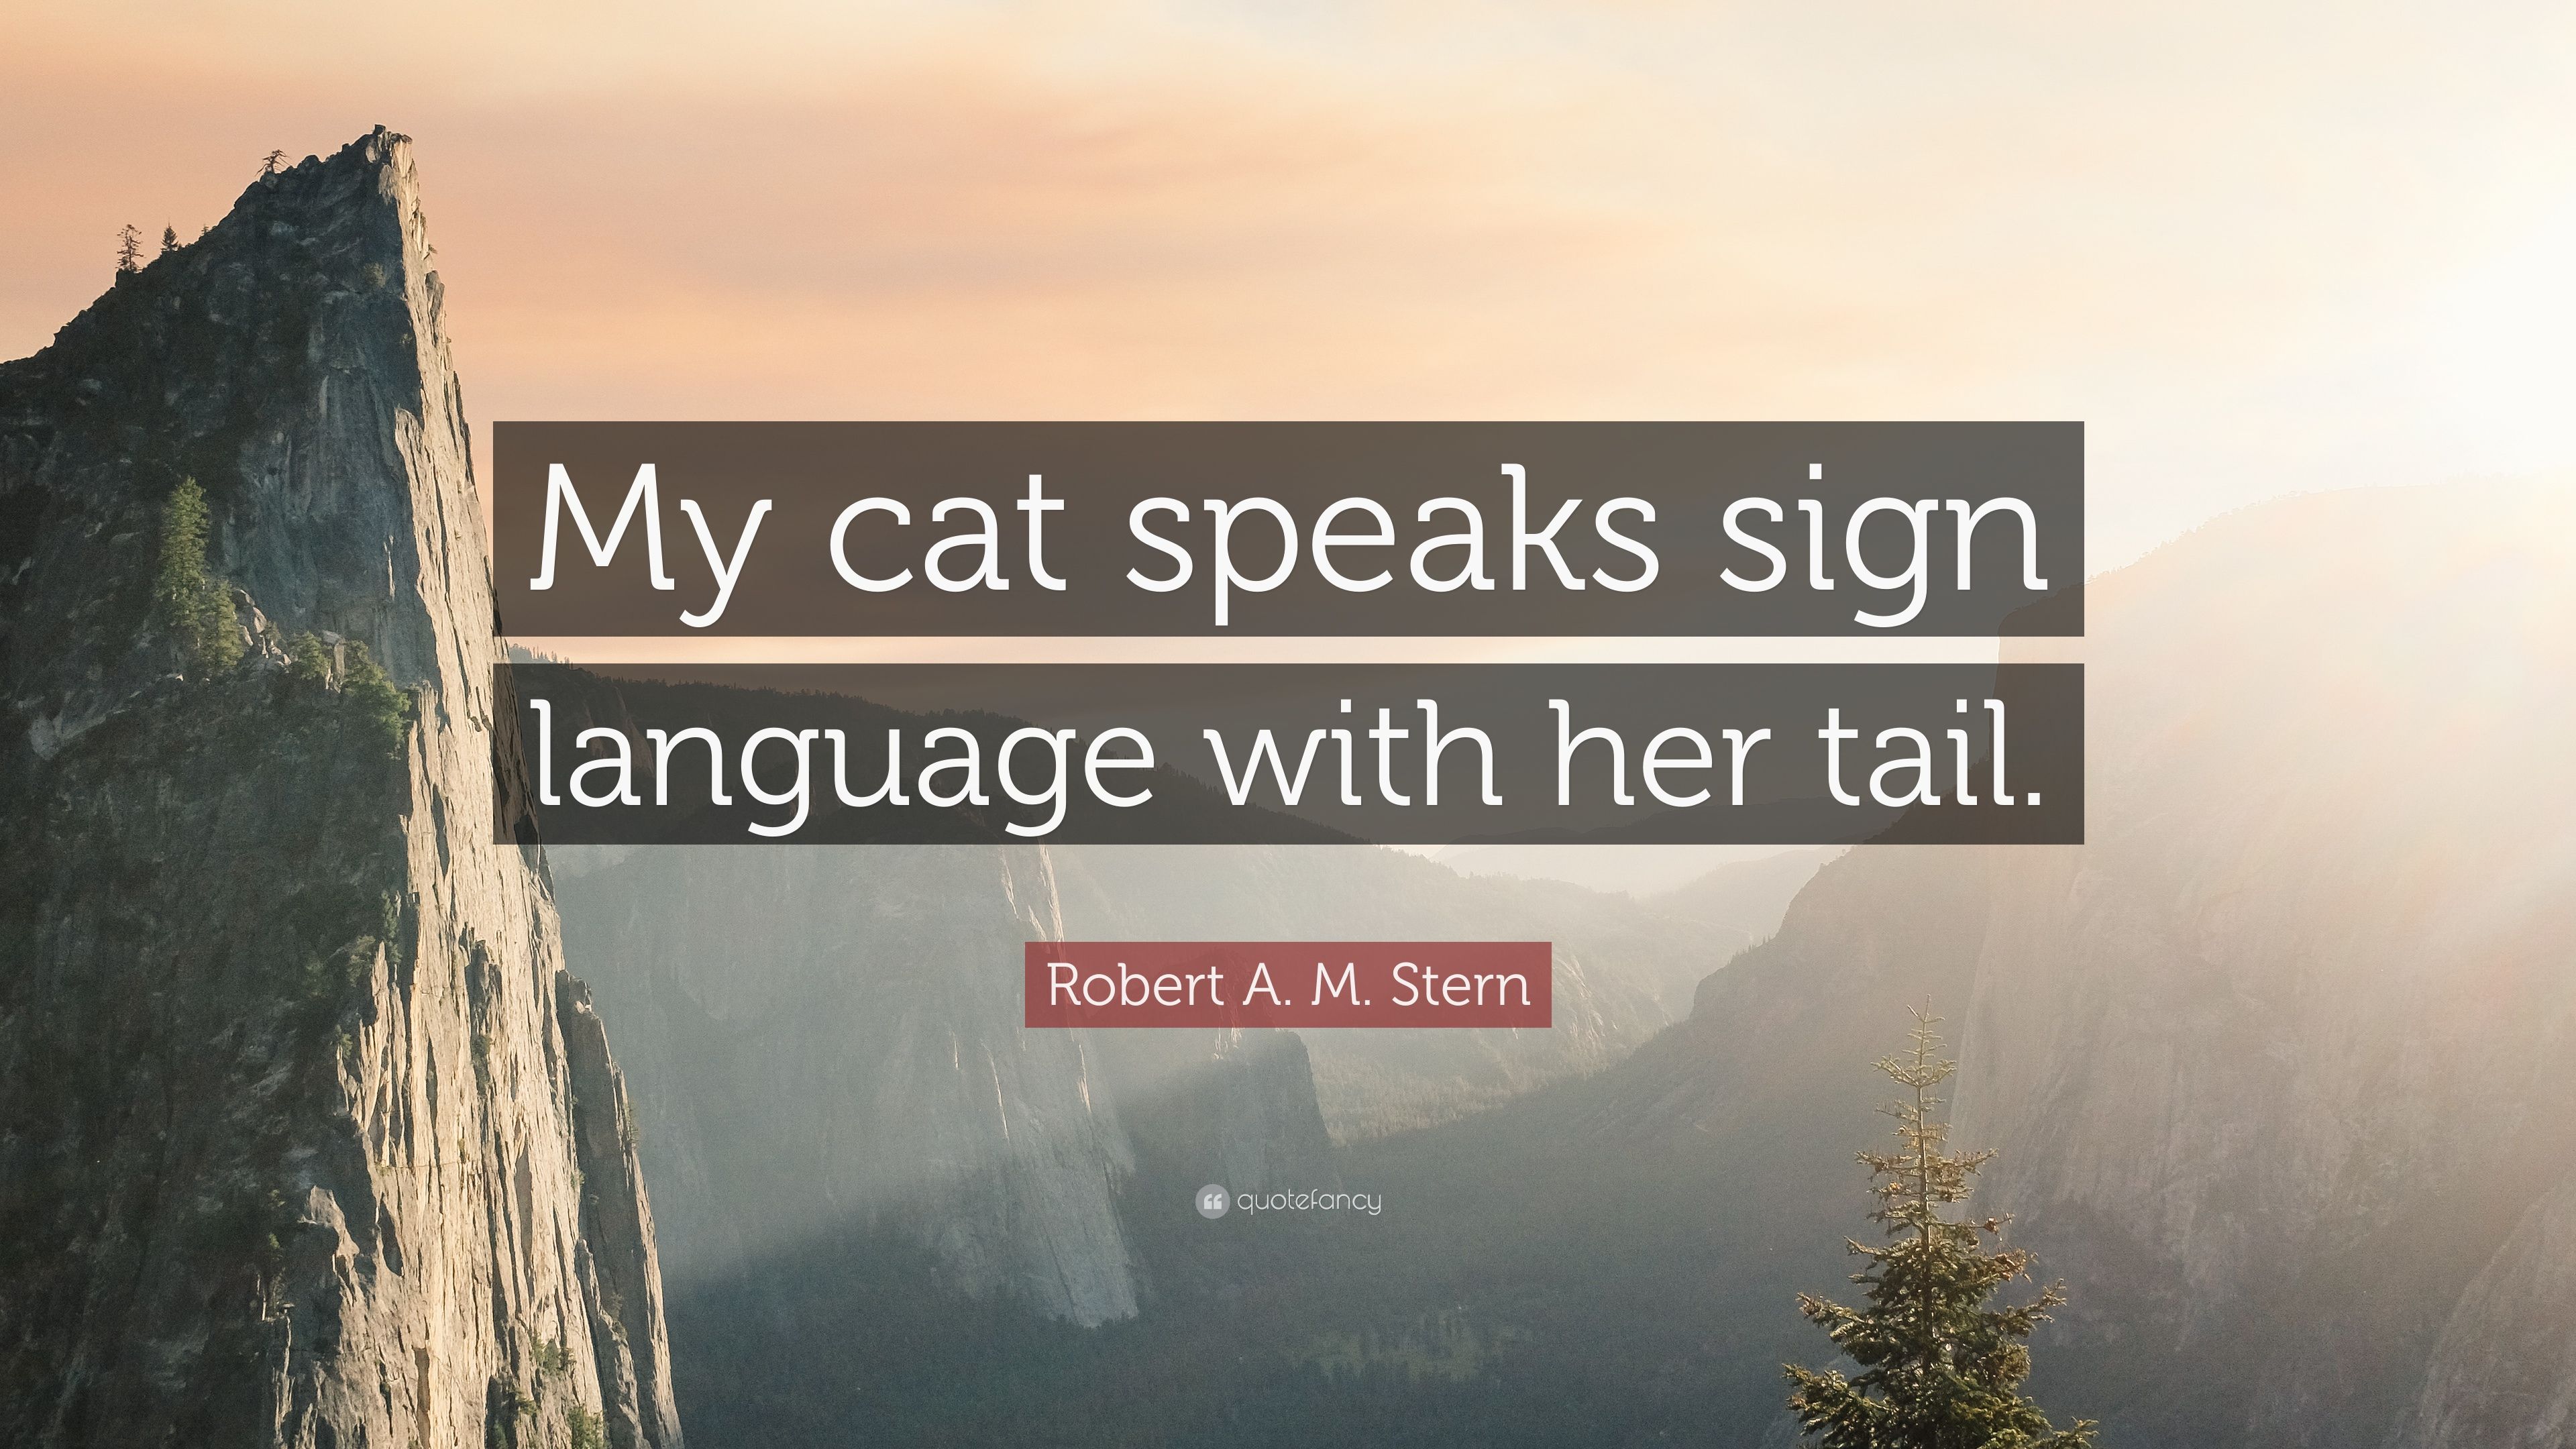 Robert A. M. Stern Quote: “My cat speaks sign language with her